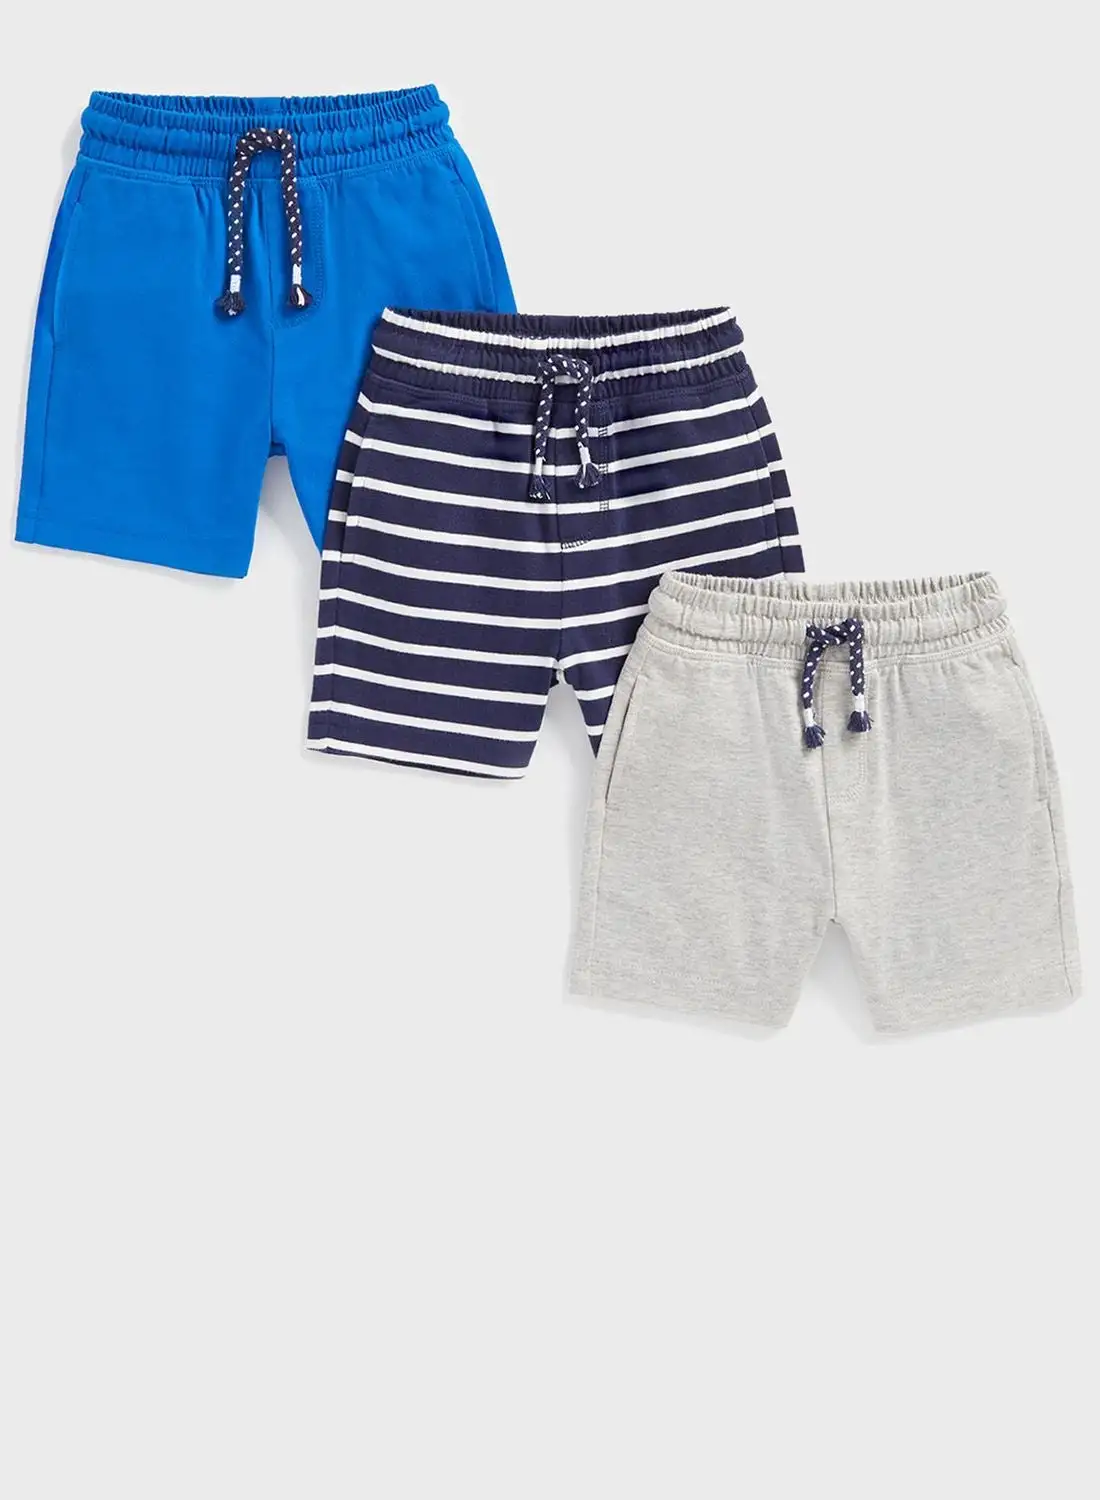 mothercare Kids 3 Pack Striped Shorts